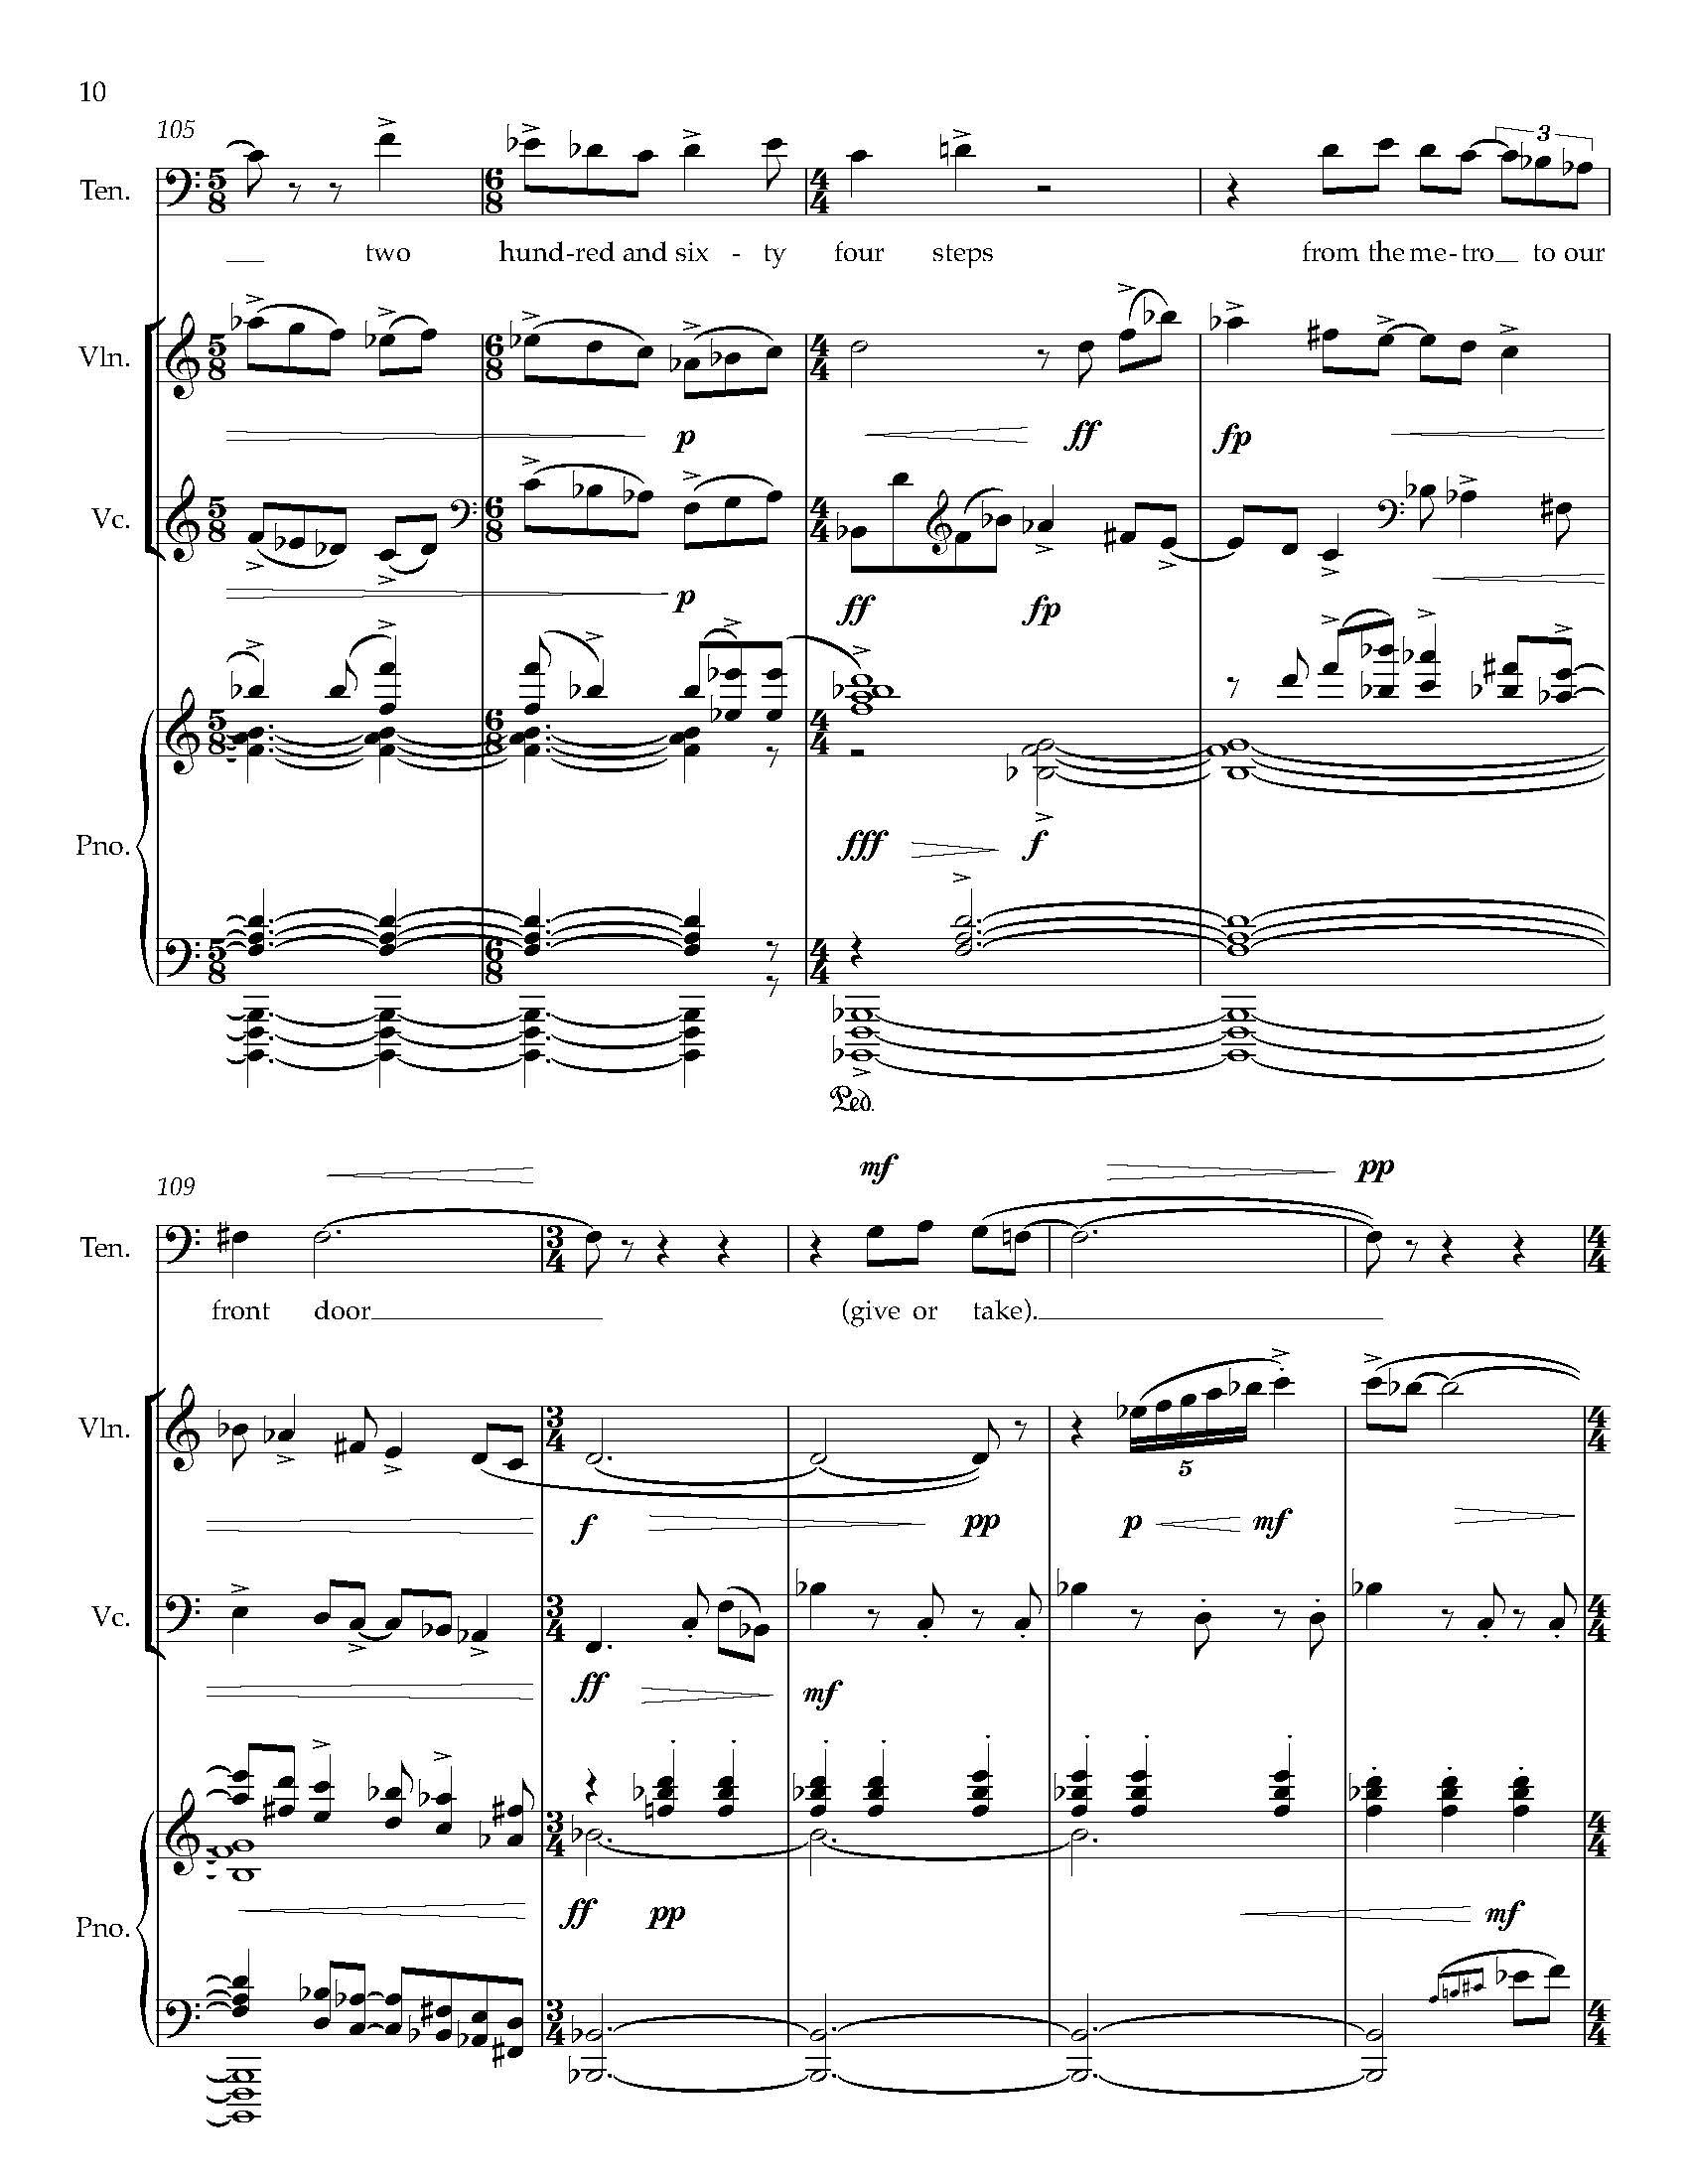 Gursky Songs - Complete Score_Page_18.jpg